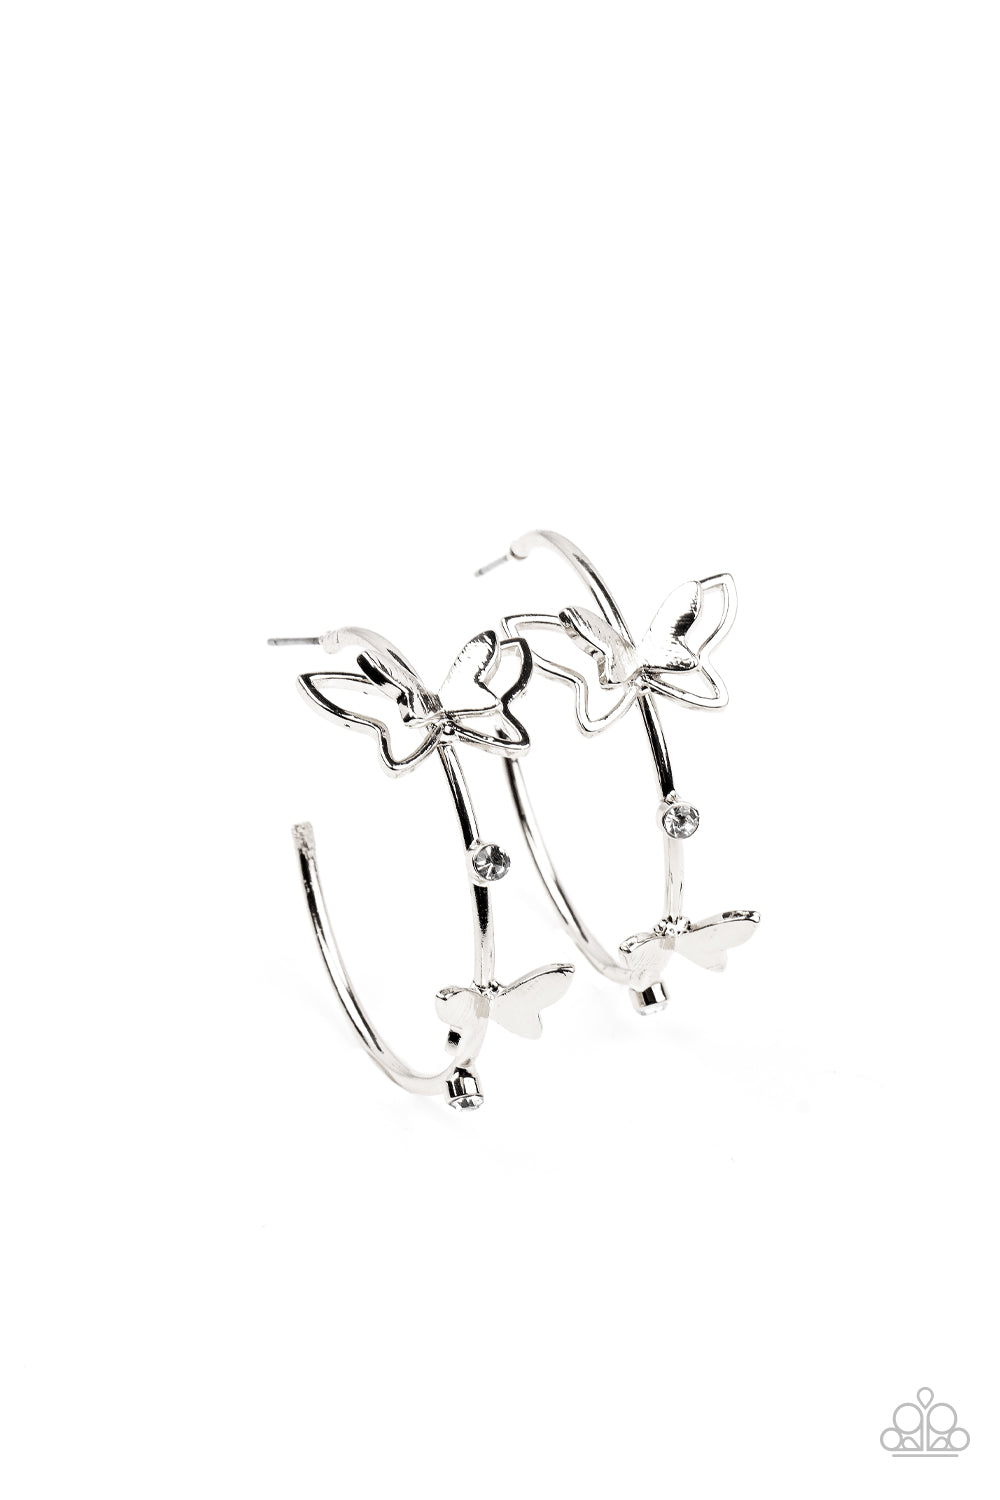 Full Out Flutter White Hoop Earring - Paparazzi Accessories  A pair of dainty silver butterflies flutter atop a glistening silver hoop dotted with dainty white rhinestones, creating a whimsical sight. Earring attaches to a standard post fitting. Hoop measures approximately 1 1/2" in diameter.  Sold as one pair of hoop earrings.